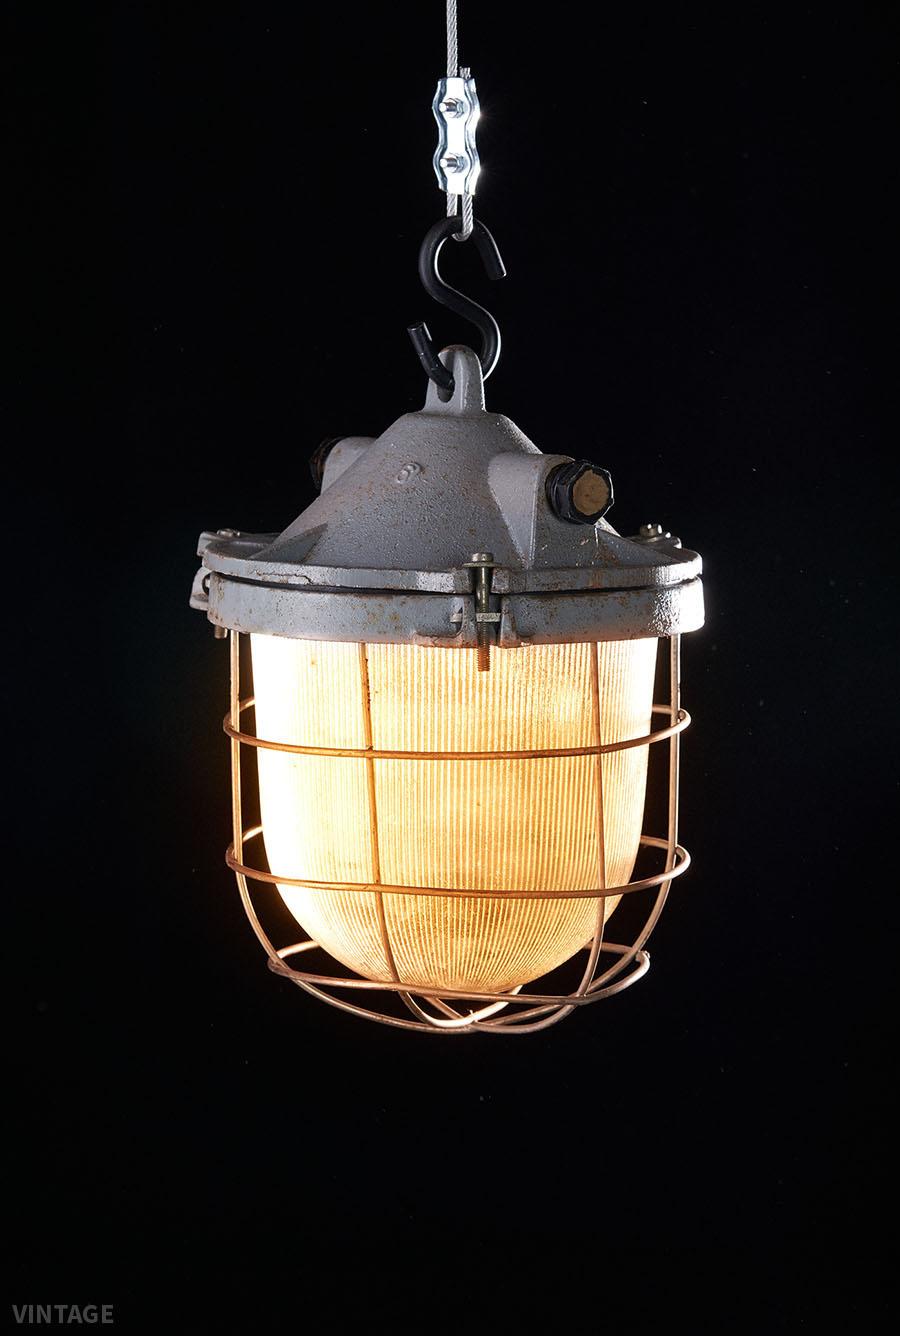 Primary Use
Hanging cast iron lamp OKS-1 used to illuminate factory and workshop spaces, where there was dustiness and a chance for a mechanical damage.

Manufacturer: Lighting Equipment Factory ZAOS in Wilkasy near Gizycko
Time period: